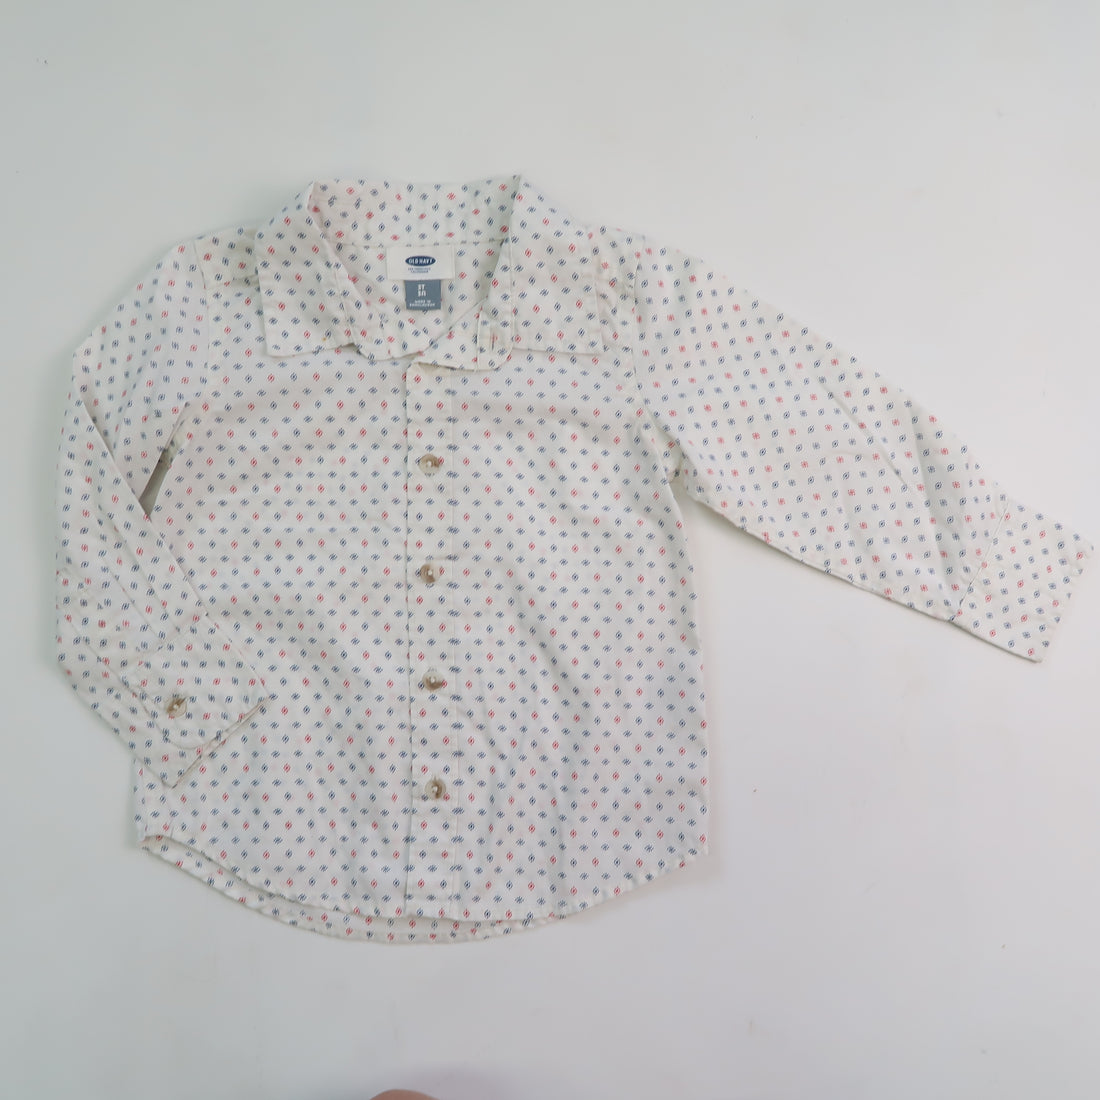 Old Navy - Long Sleeve (3T)